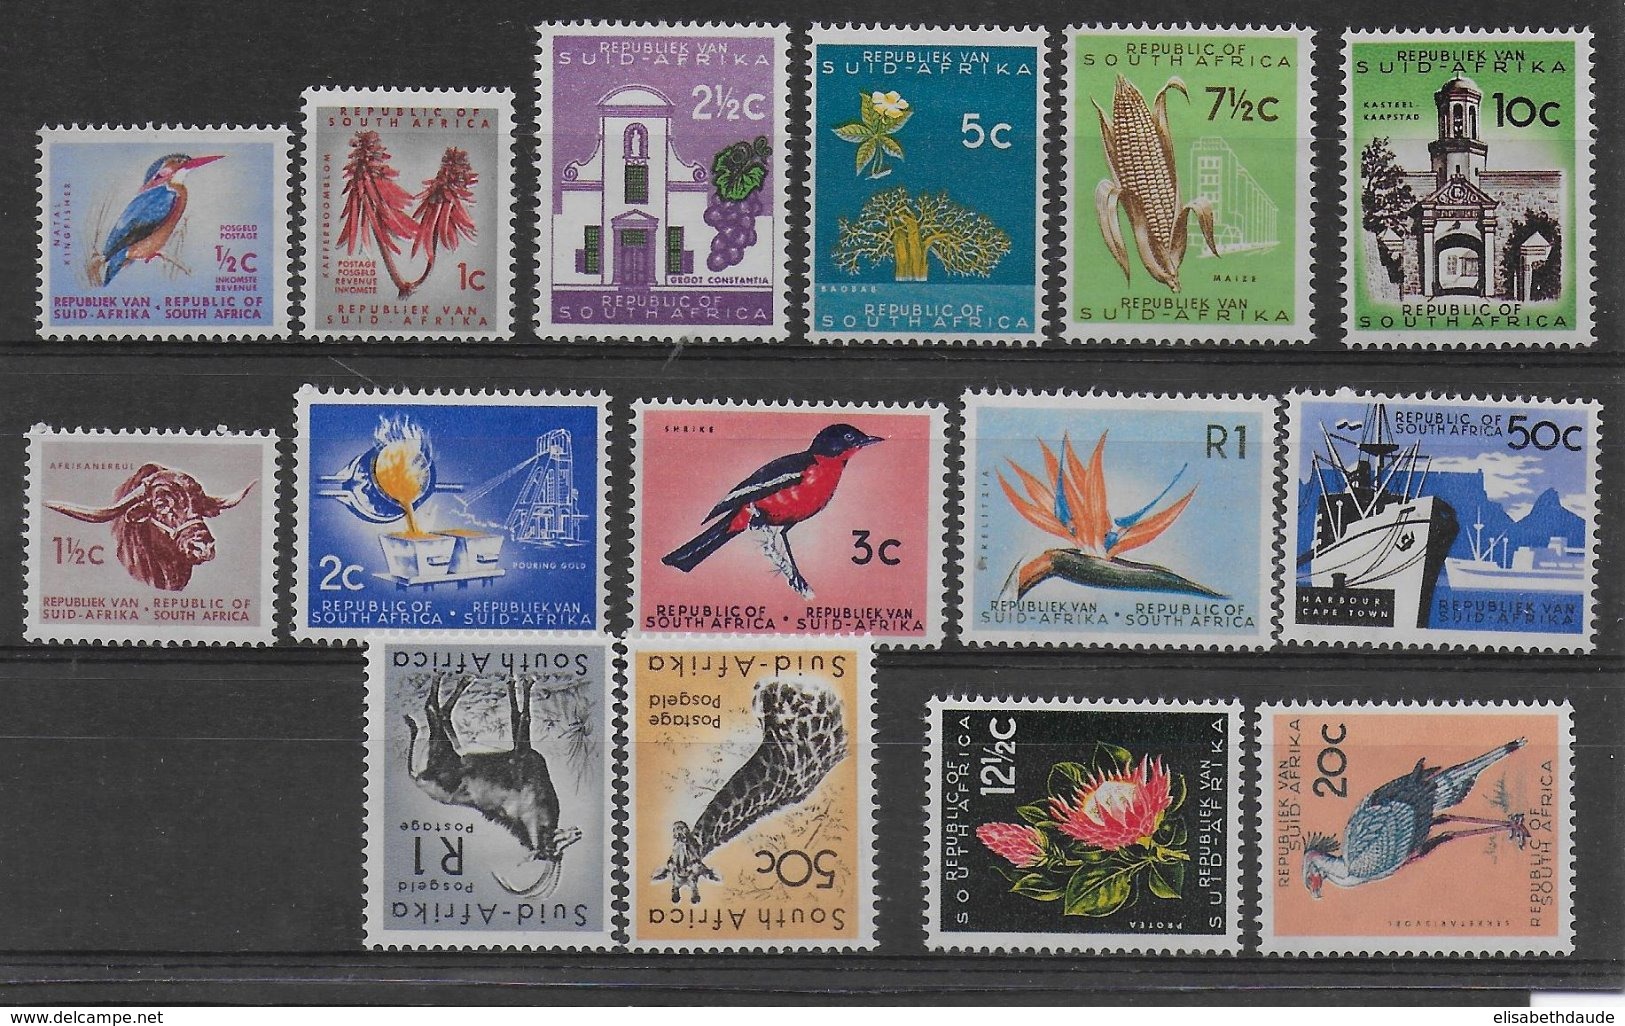 SOUTH AFRICA - YVERT N° 242/243 * MLH + 248/260 ** MNH  - COTE = 130 EUR. - ANIMAUX / FLEURS - Unused Stamps